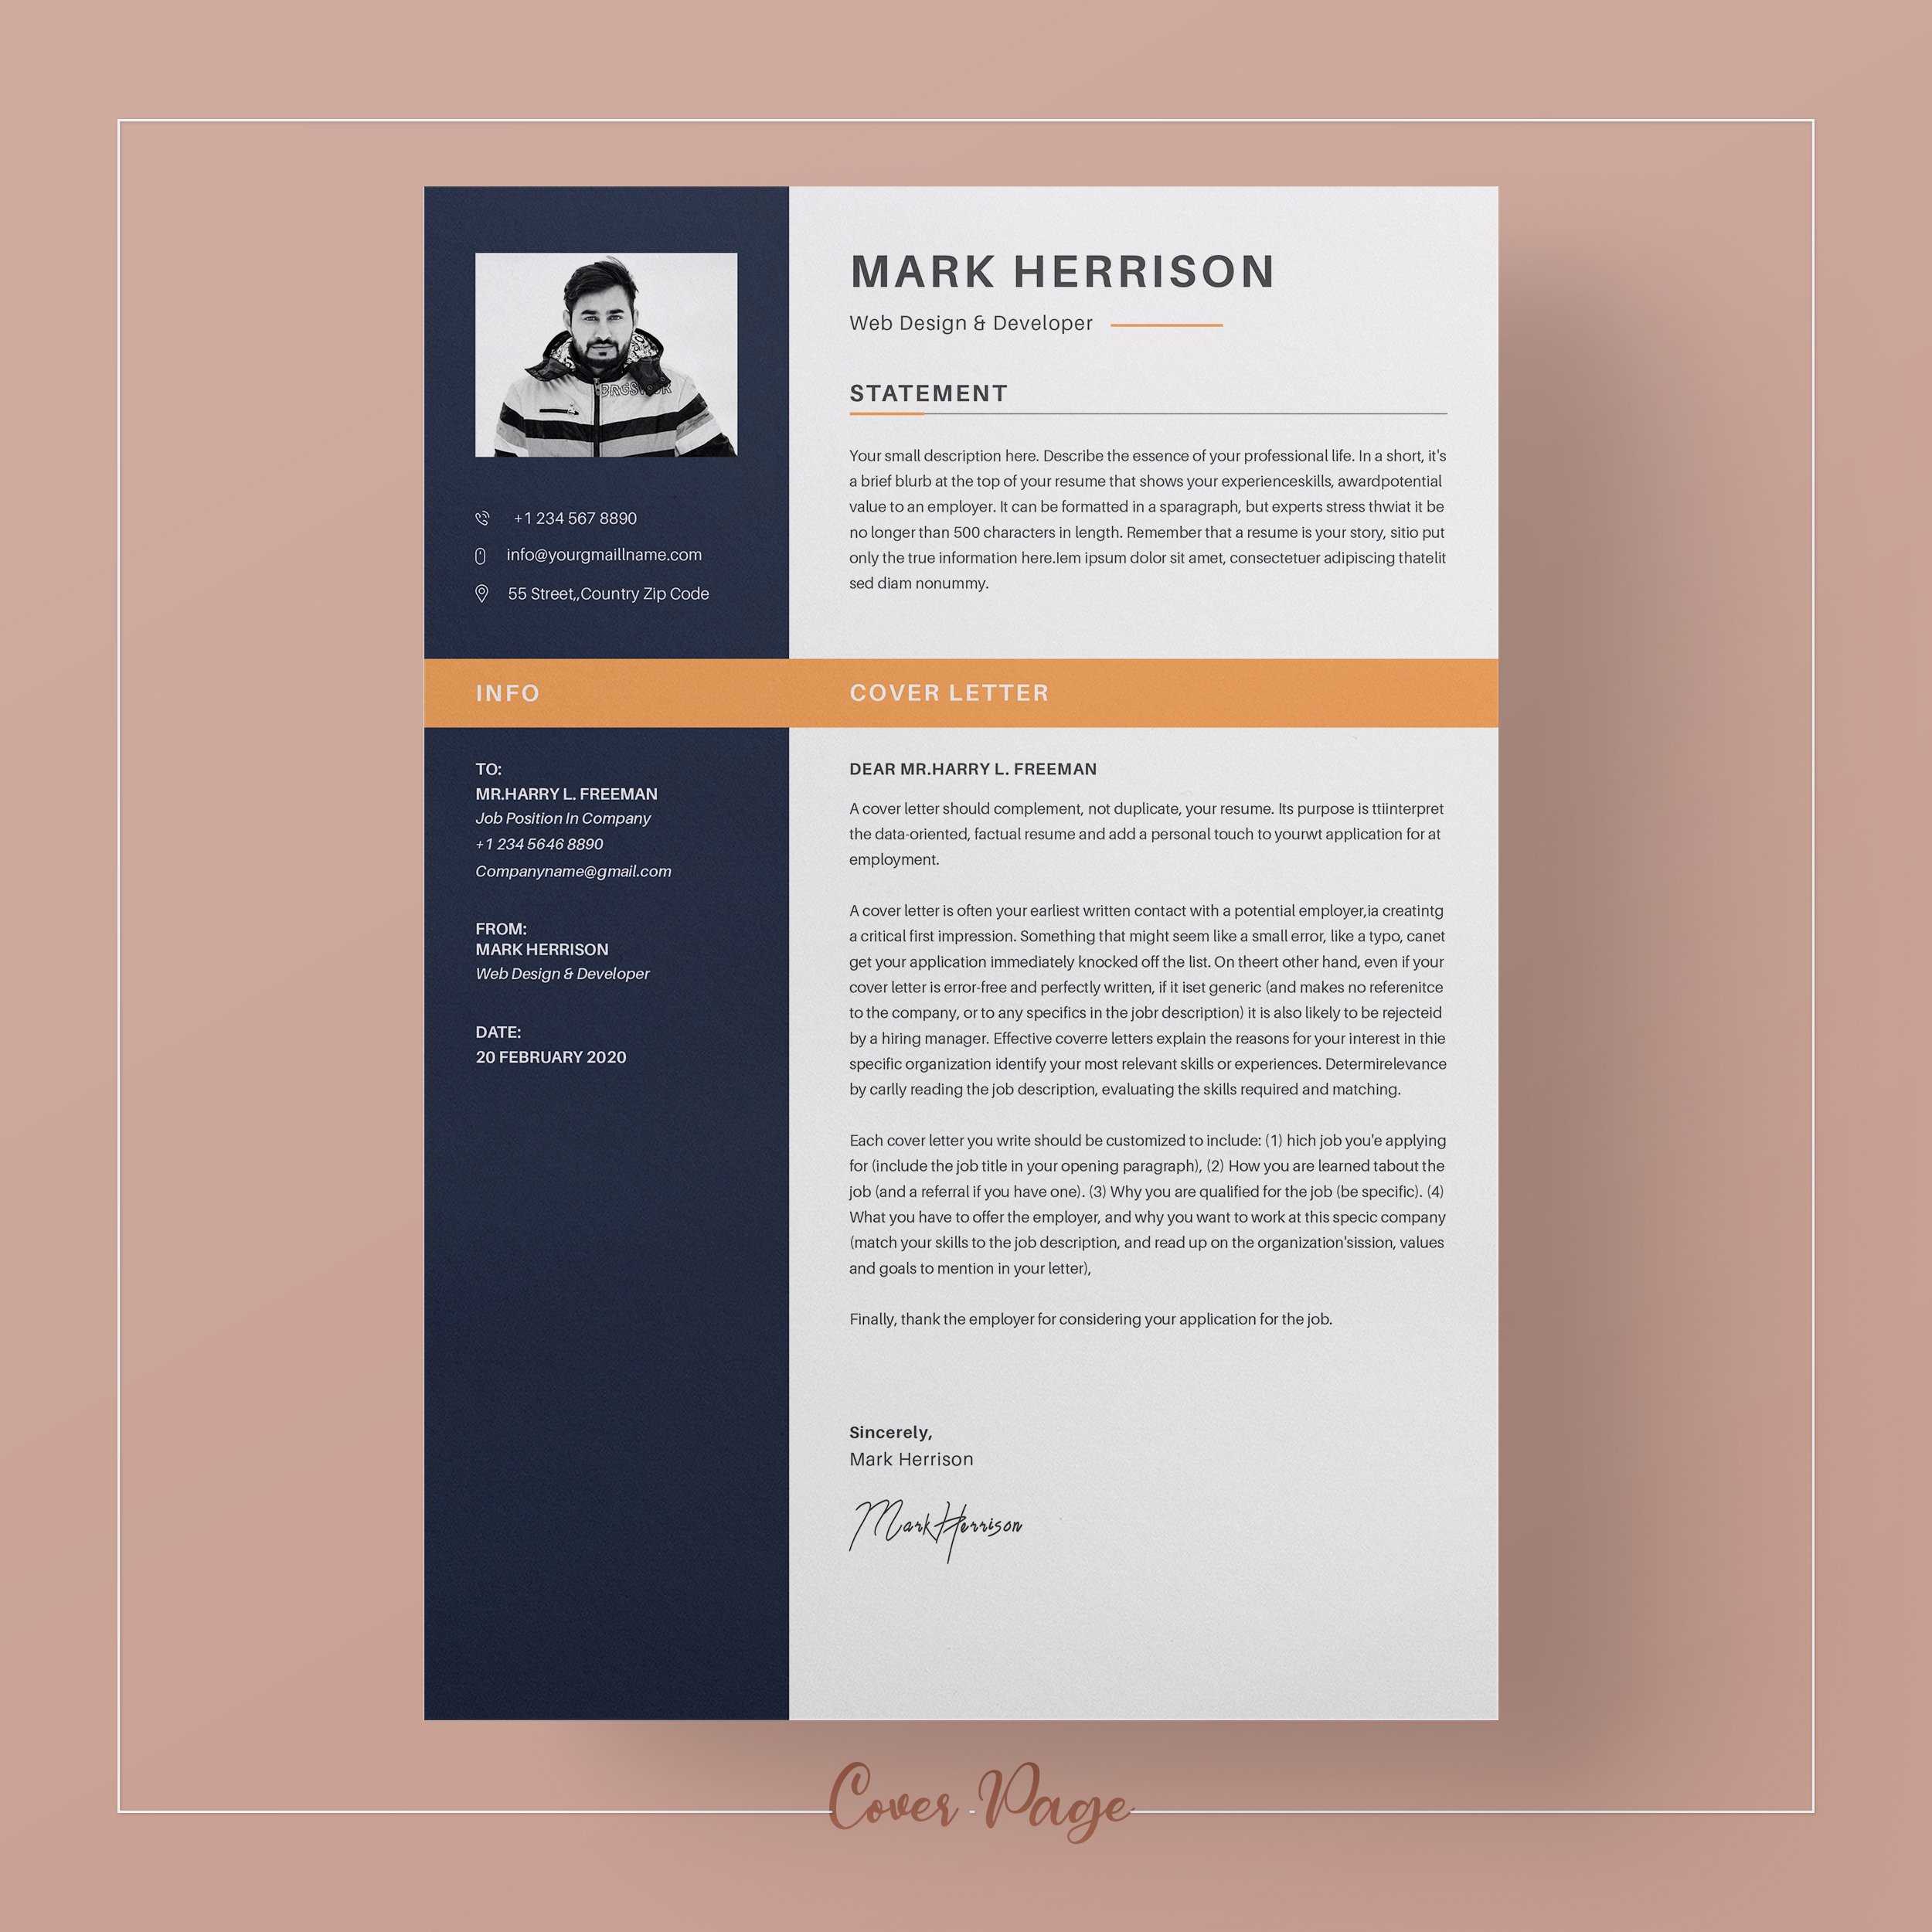 Professional resume template with a blue and orange color scheme.